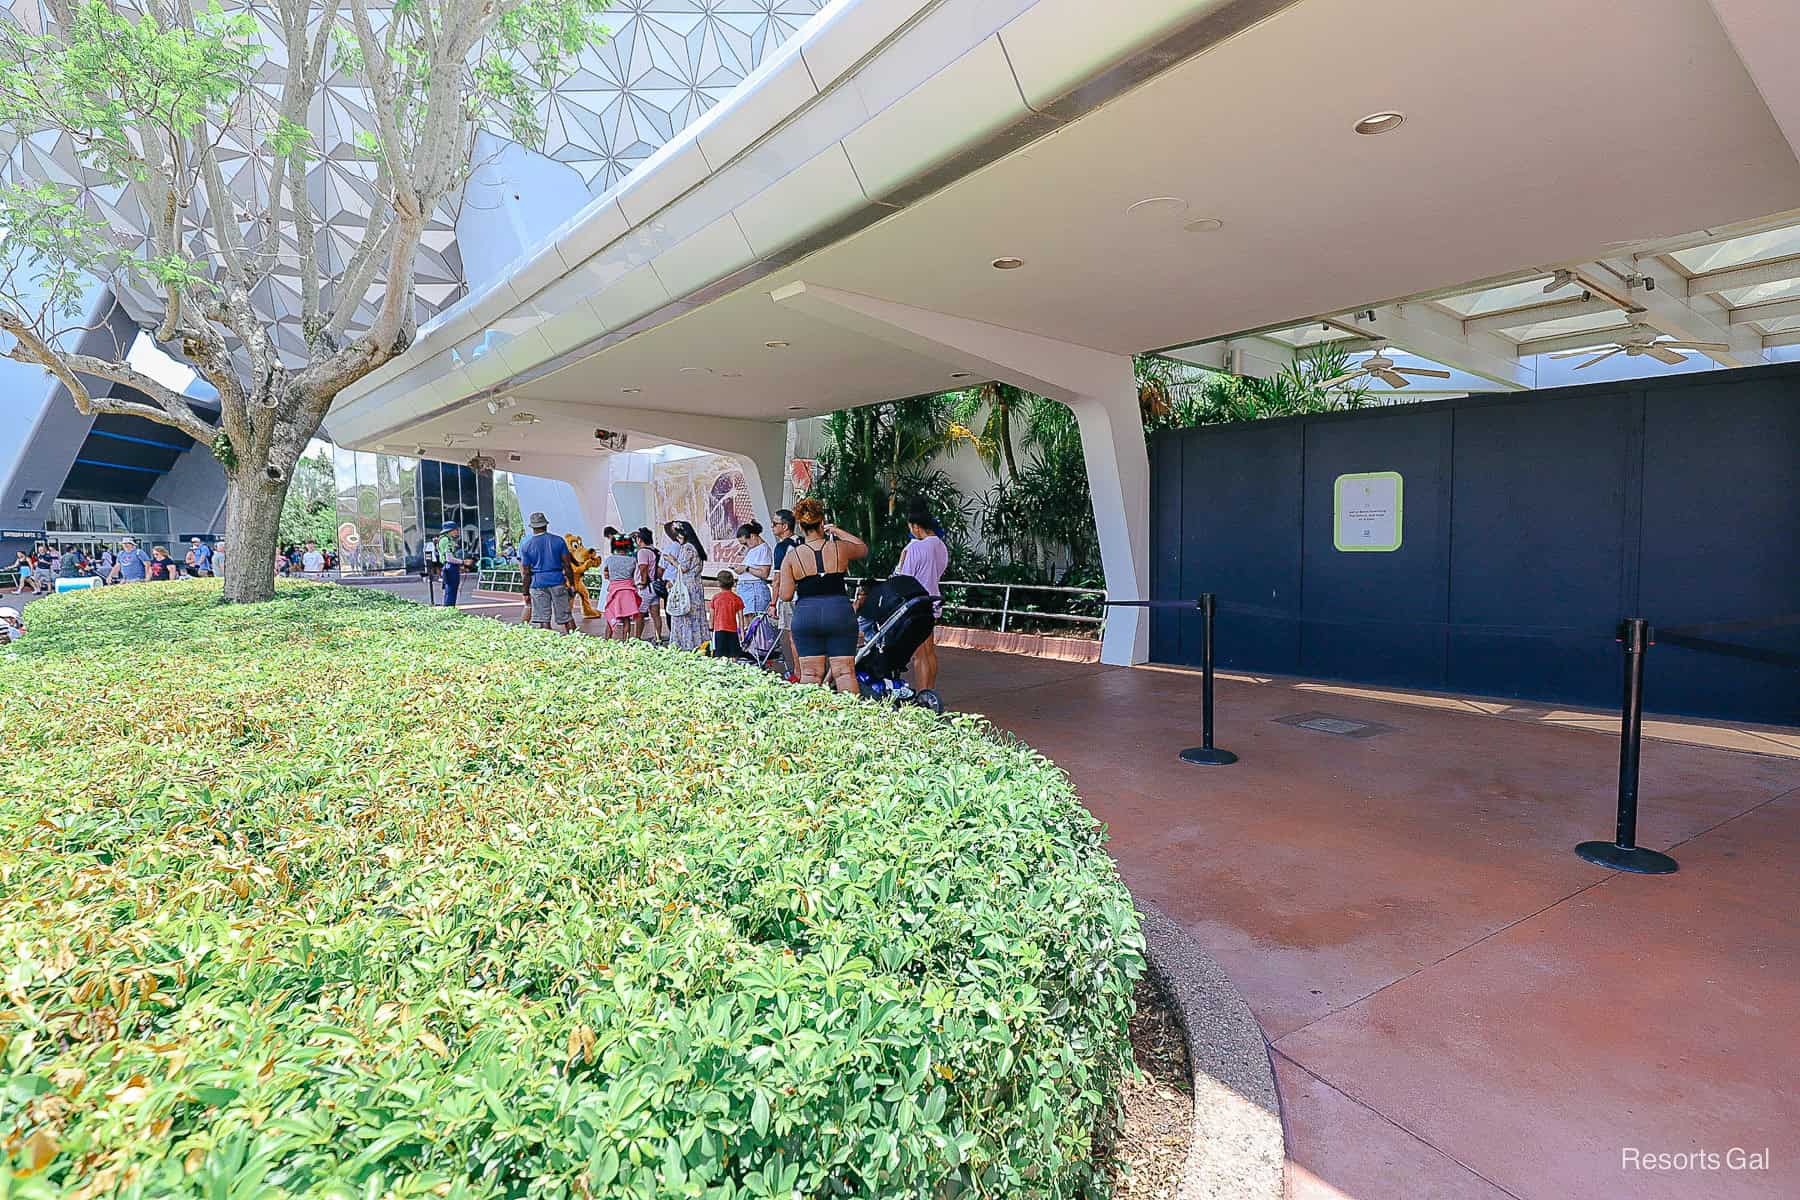 guests waiting in a partially covered area to meet Pluto at Epcot's main entrance 